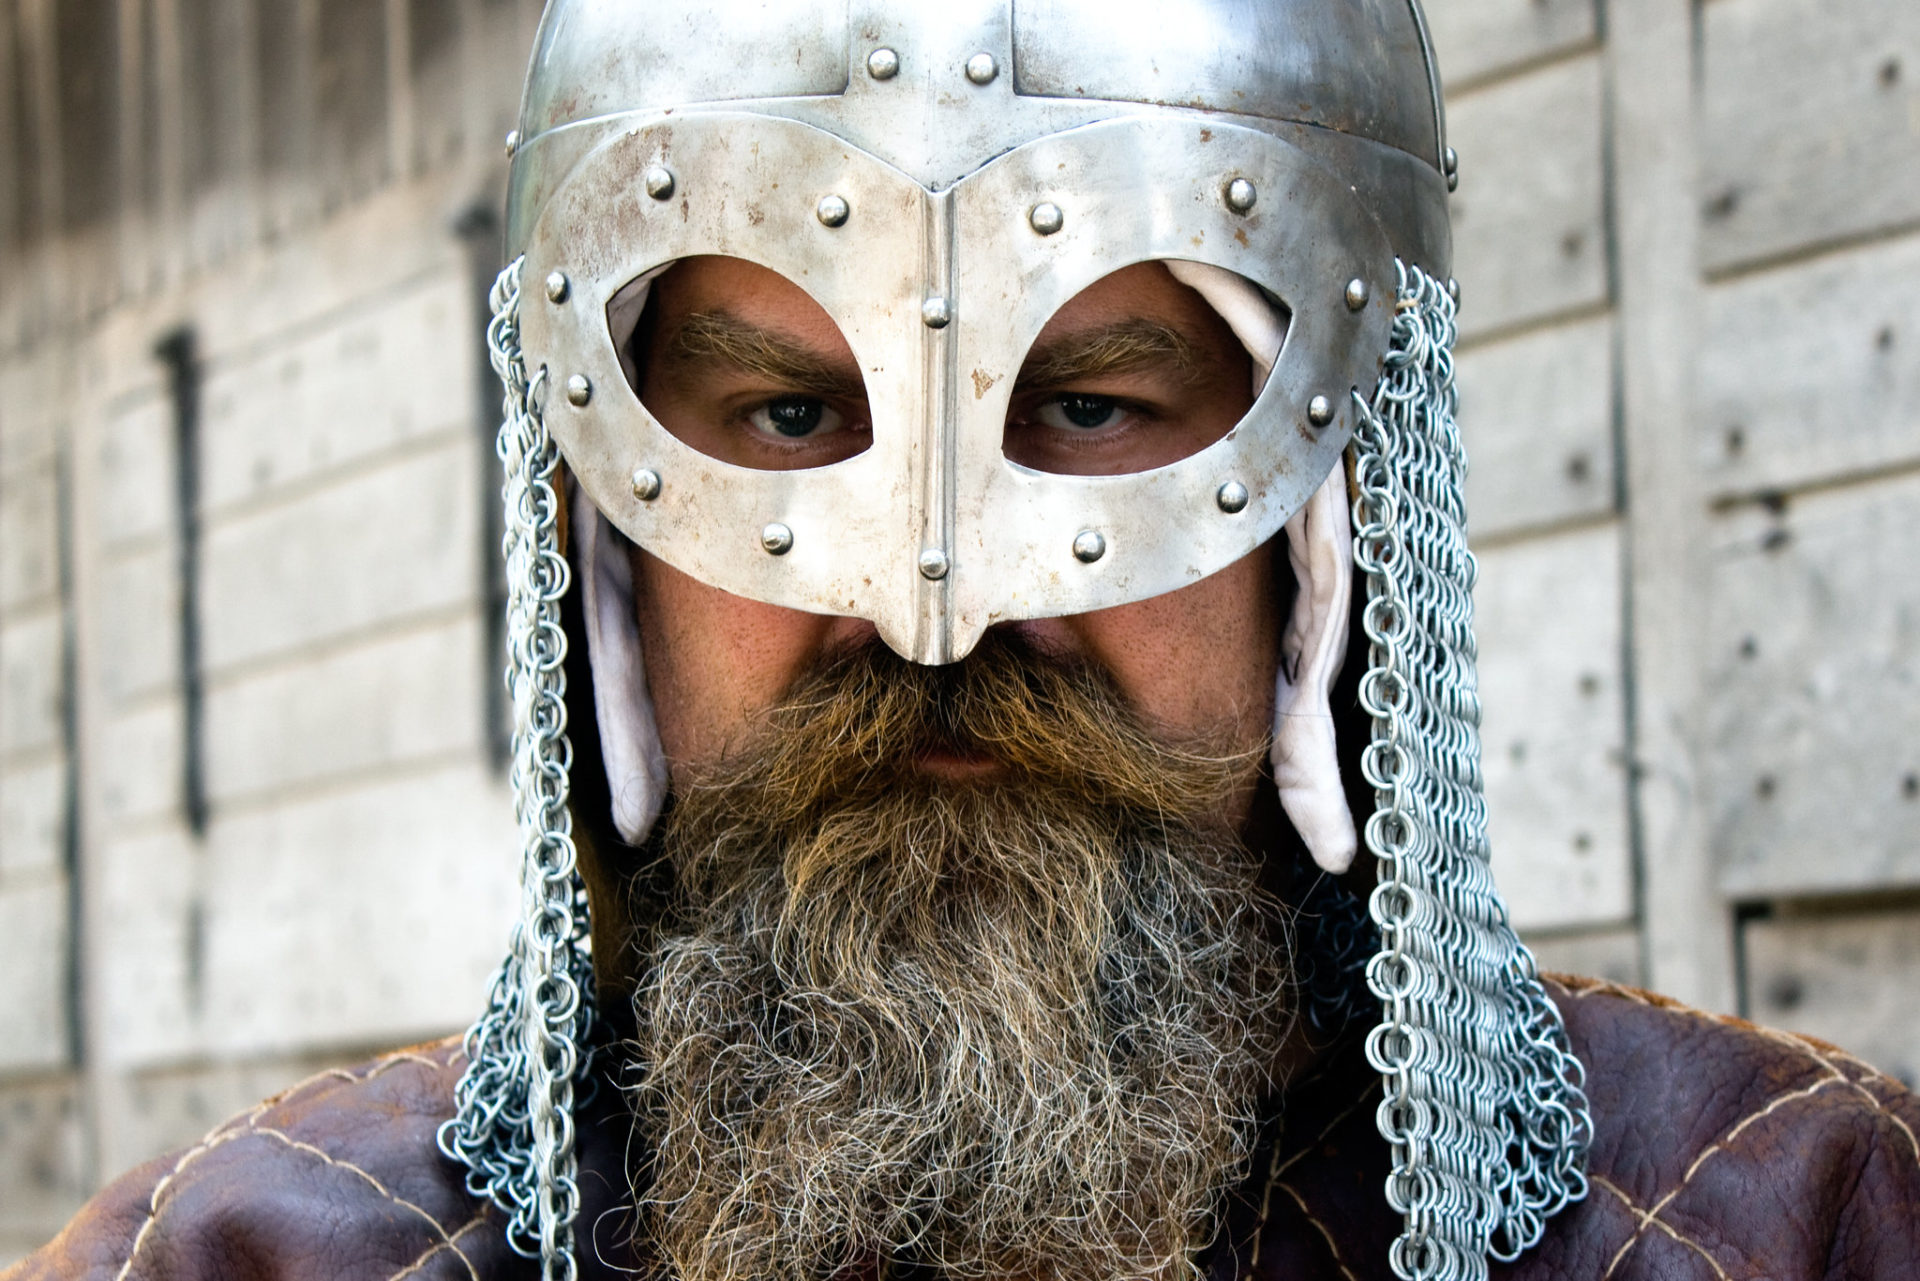 5 things you might not have known about the Vikings